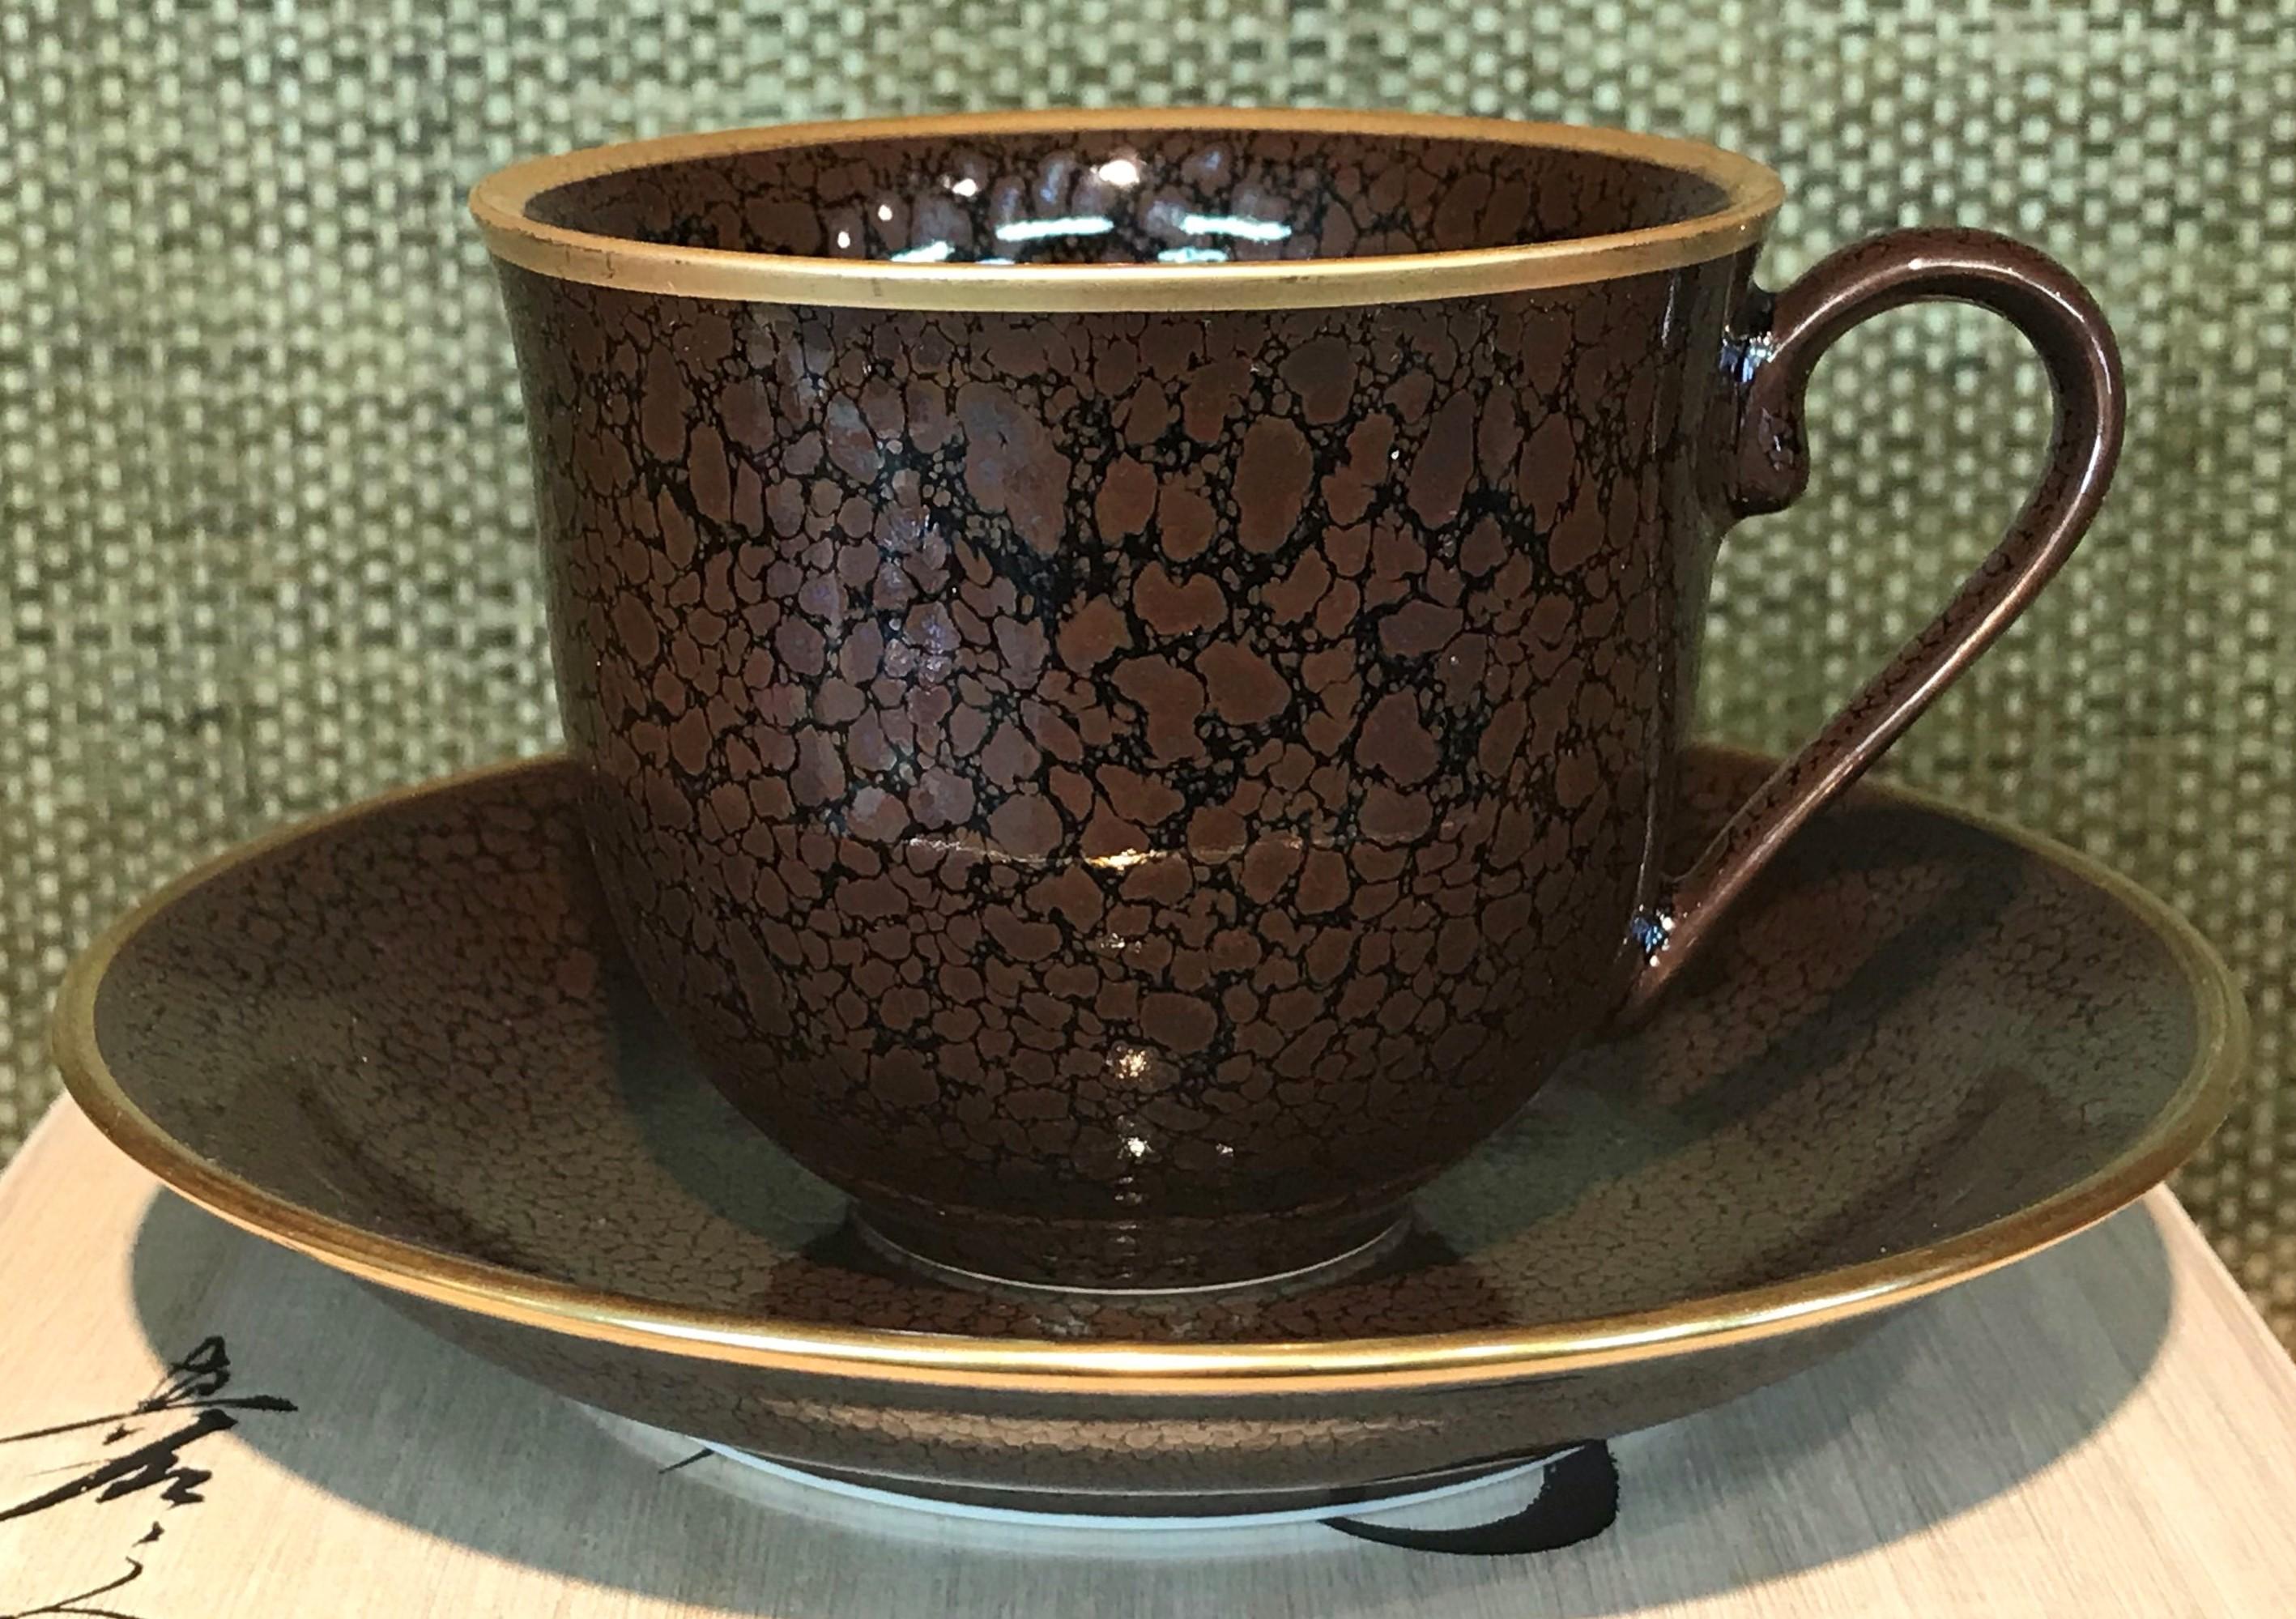 Platinum Japanese Hand-Glazed Blue Porcelain Cup and Saucer by Contemporary Master Artist